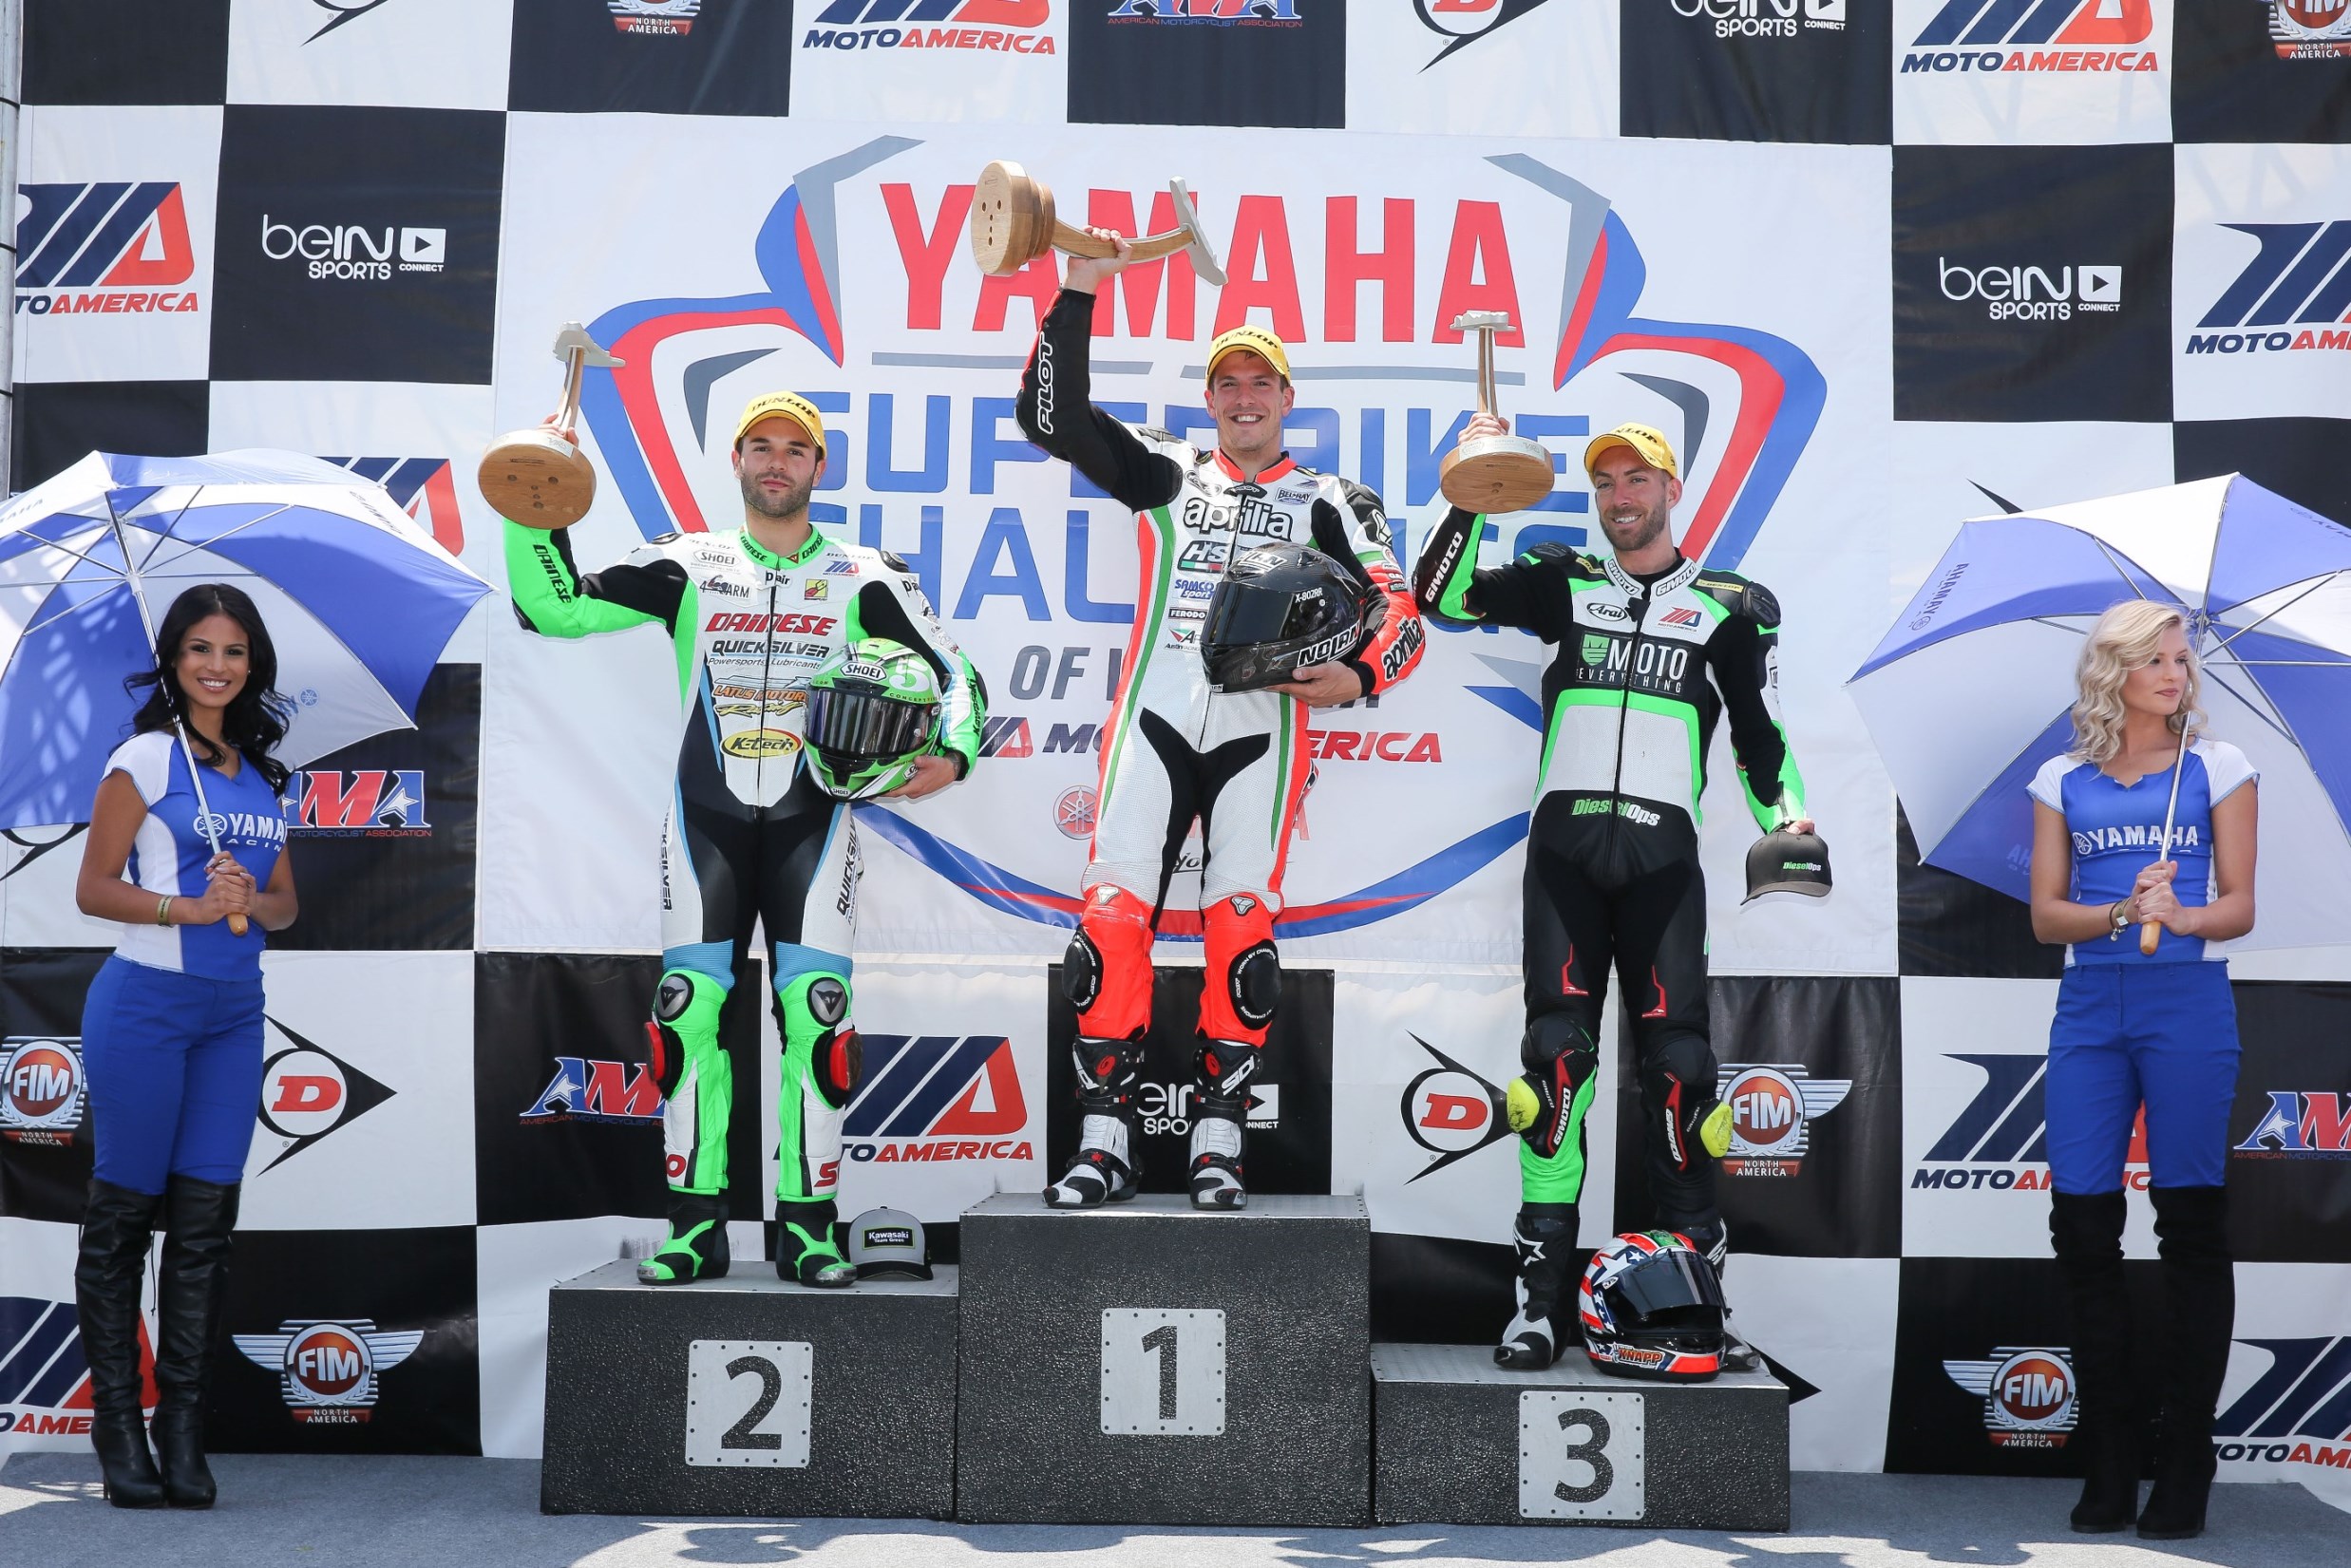 APRILIA HSBK RACING FORGES ON IN VIRGINIA, MAINTAINS LEAD IN SUPERSTOCK 1000